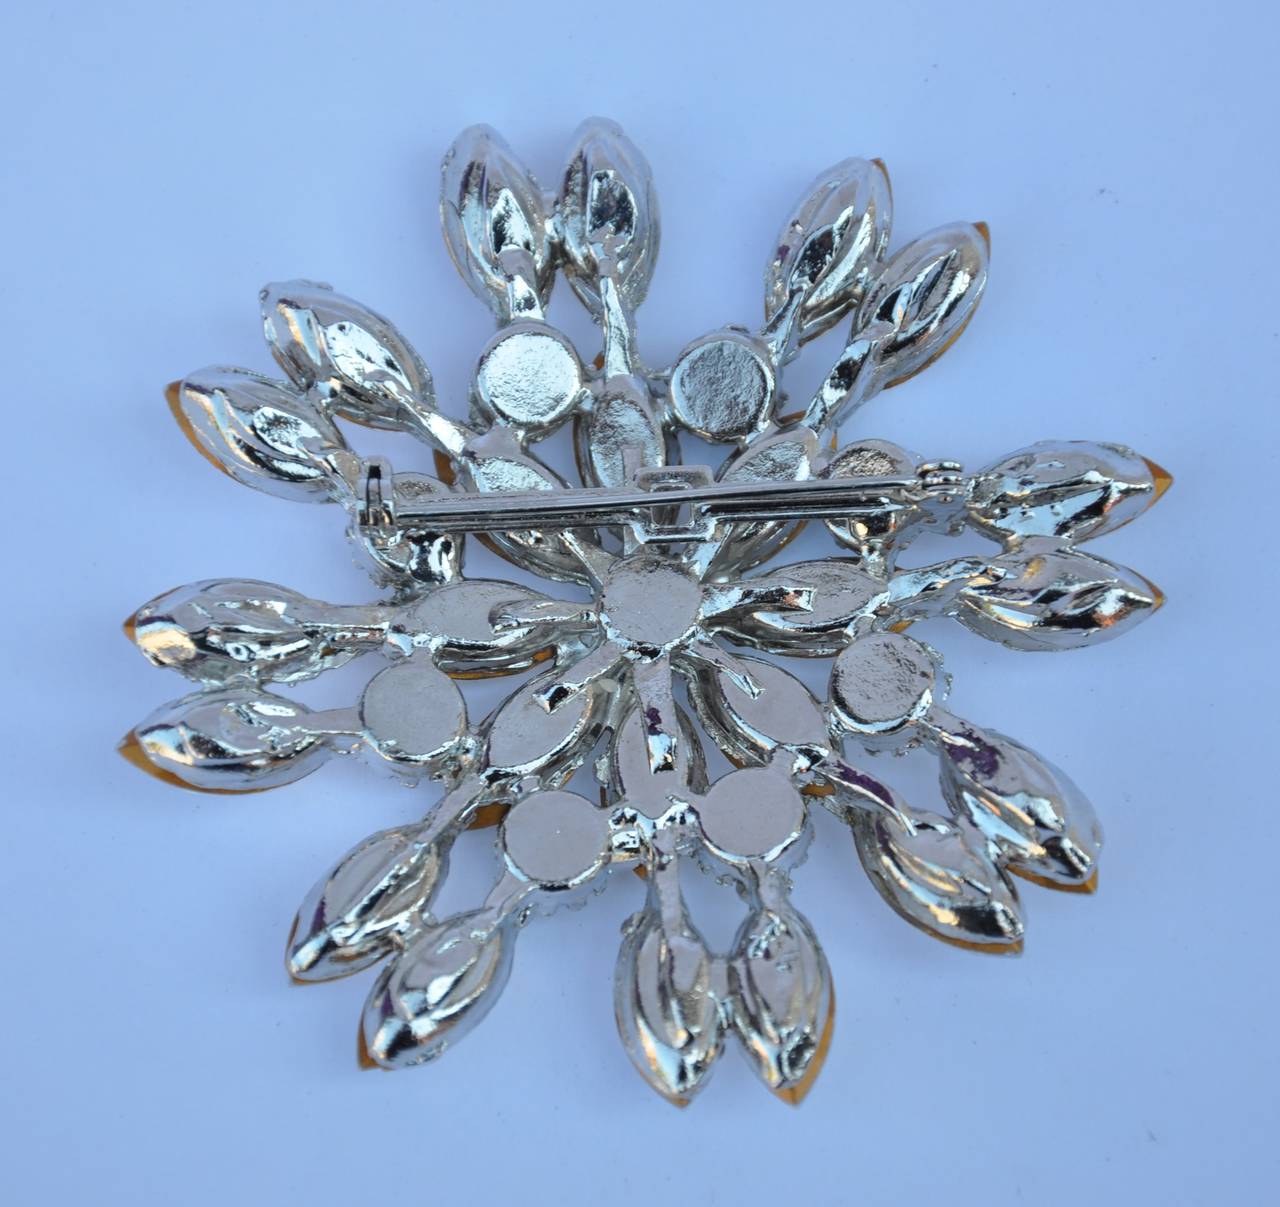 This wonderful huge magnificent multi-facade "Starburst" rhinestone brooch measures 2 3/4" in circumference and 3/8" in depth. This brooch is simply wonderful!